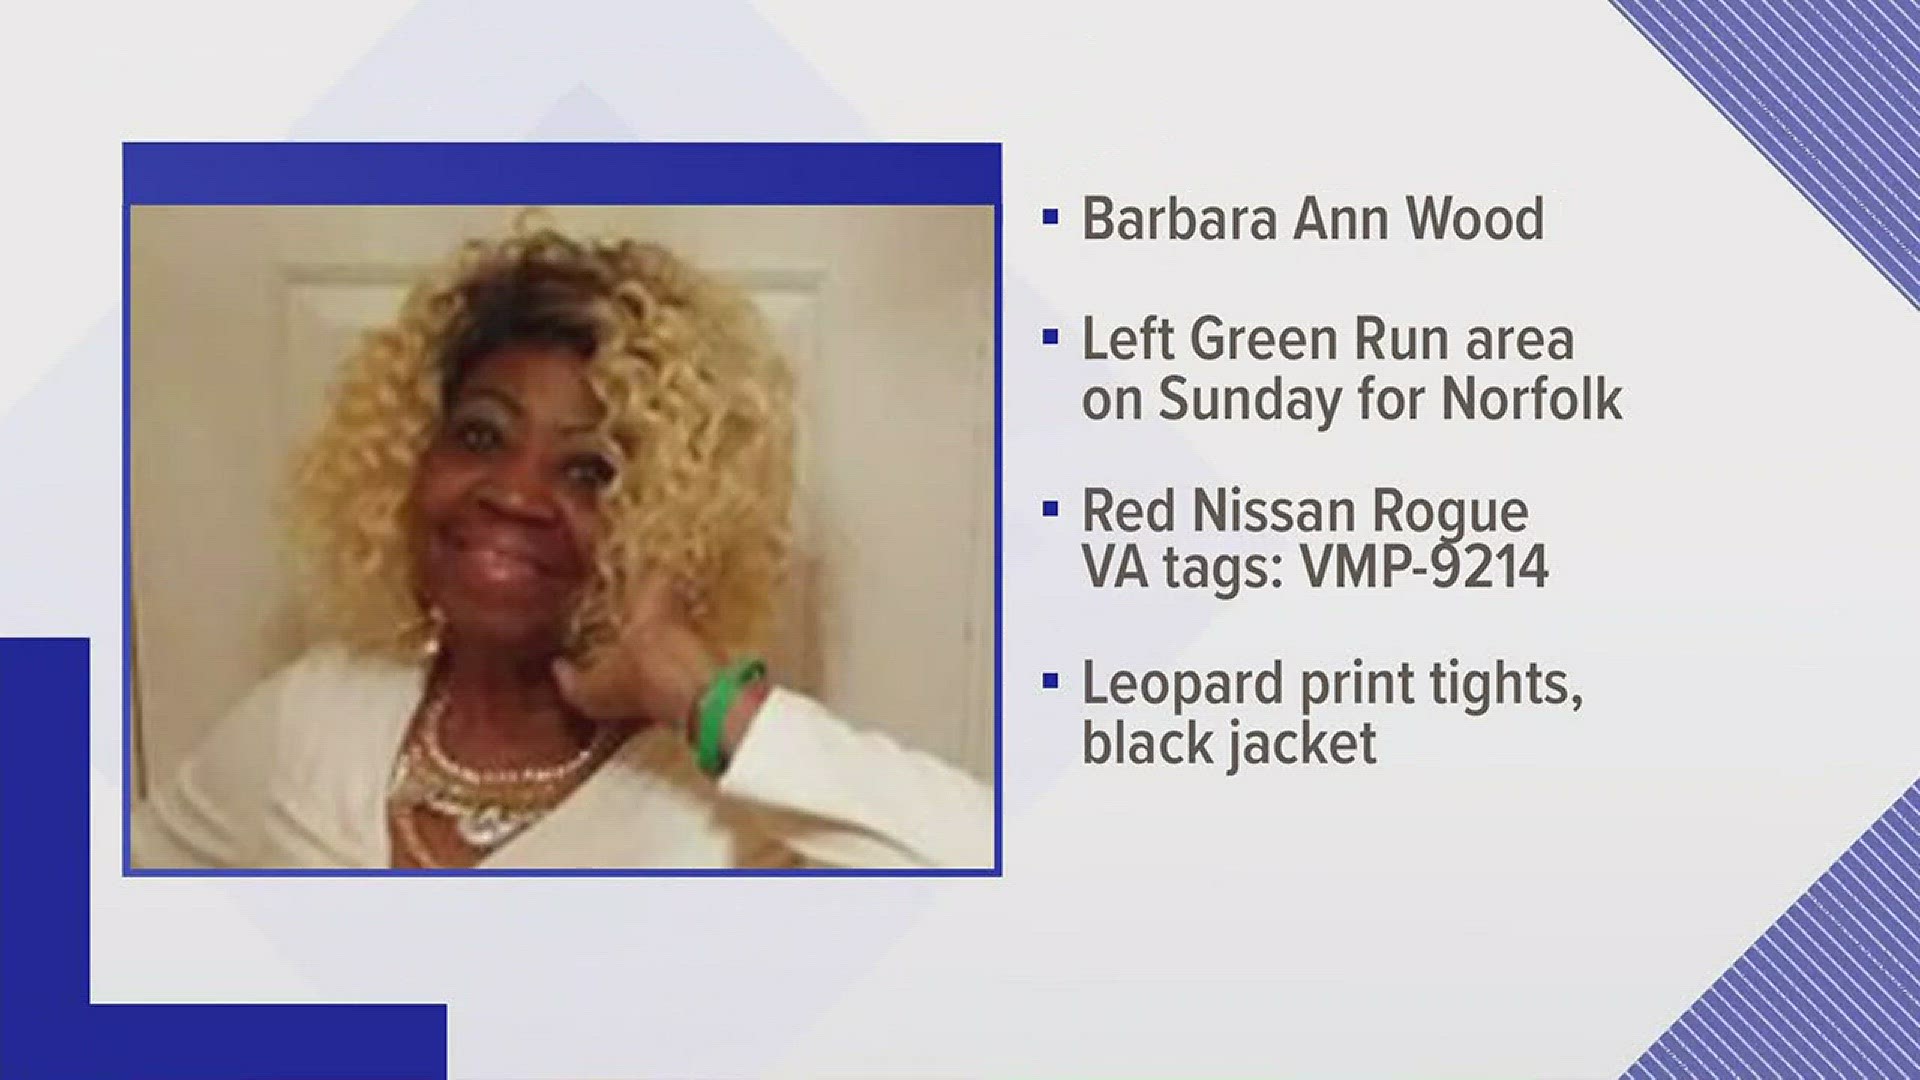 Barbara Ann Wood left her home in the Green Run area yesterday to visit a family member in Norfolk, but she never arrived.